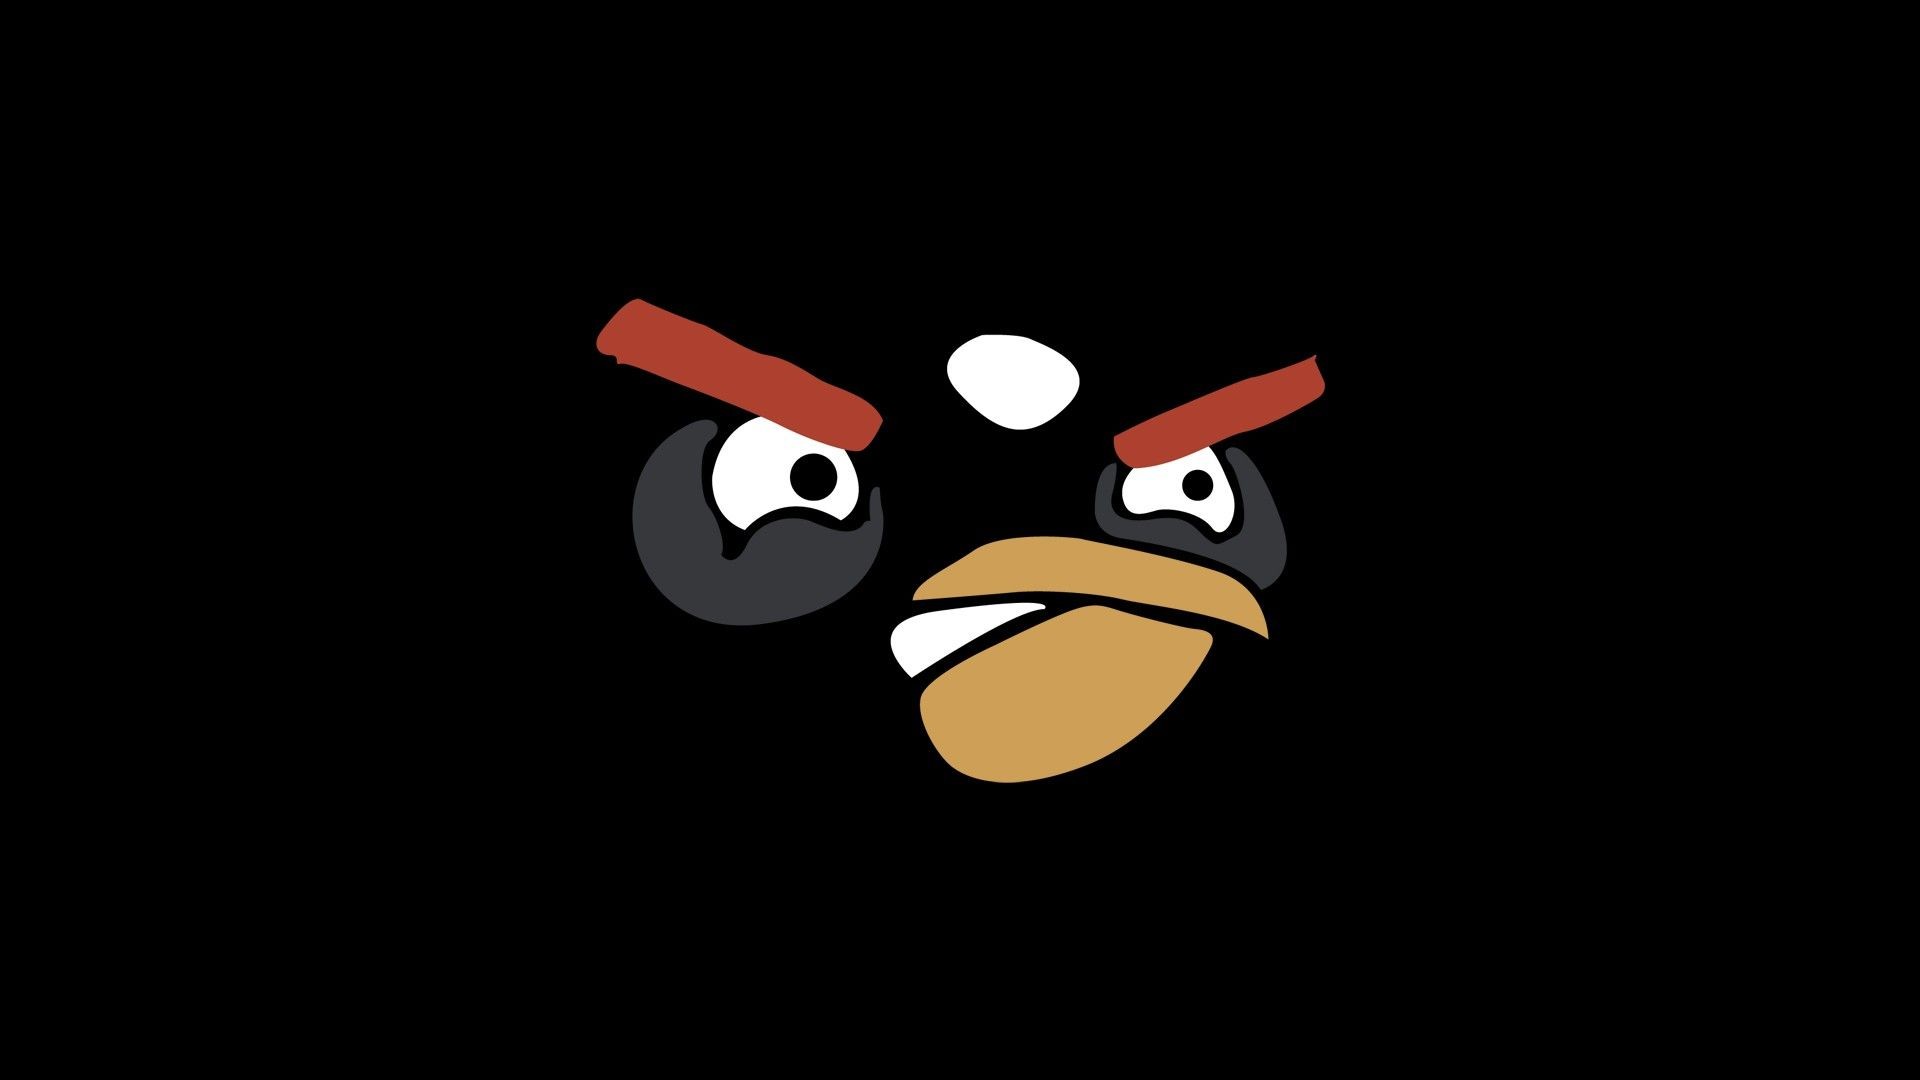 General 1920x1080 Angry Birds minimalism black black background video games Rovio Entertainment video game characters